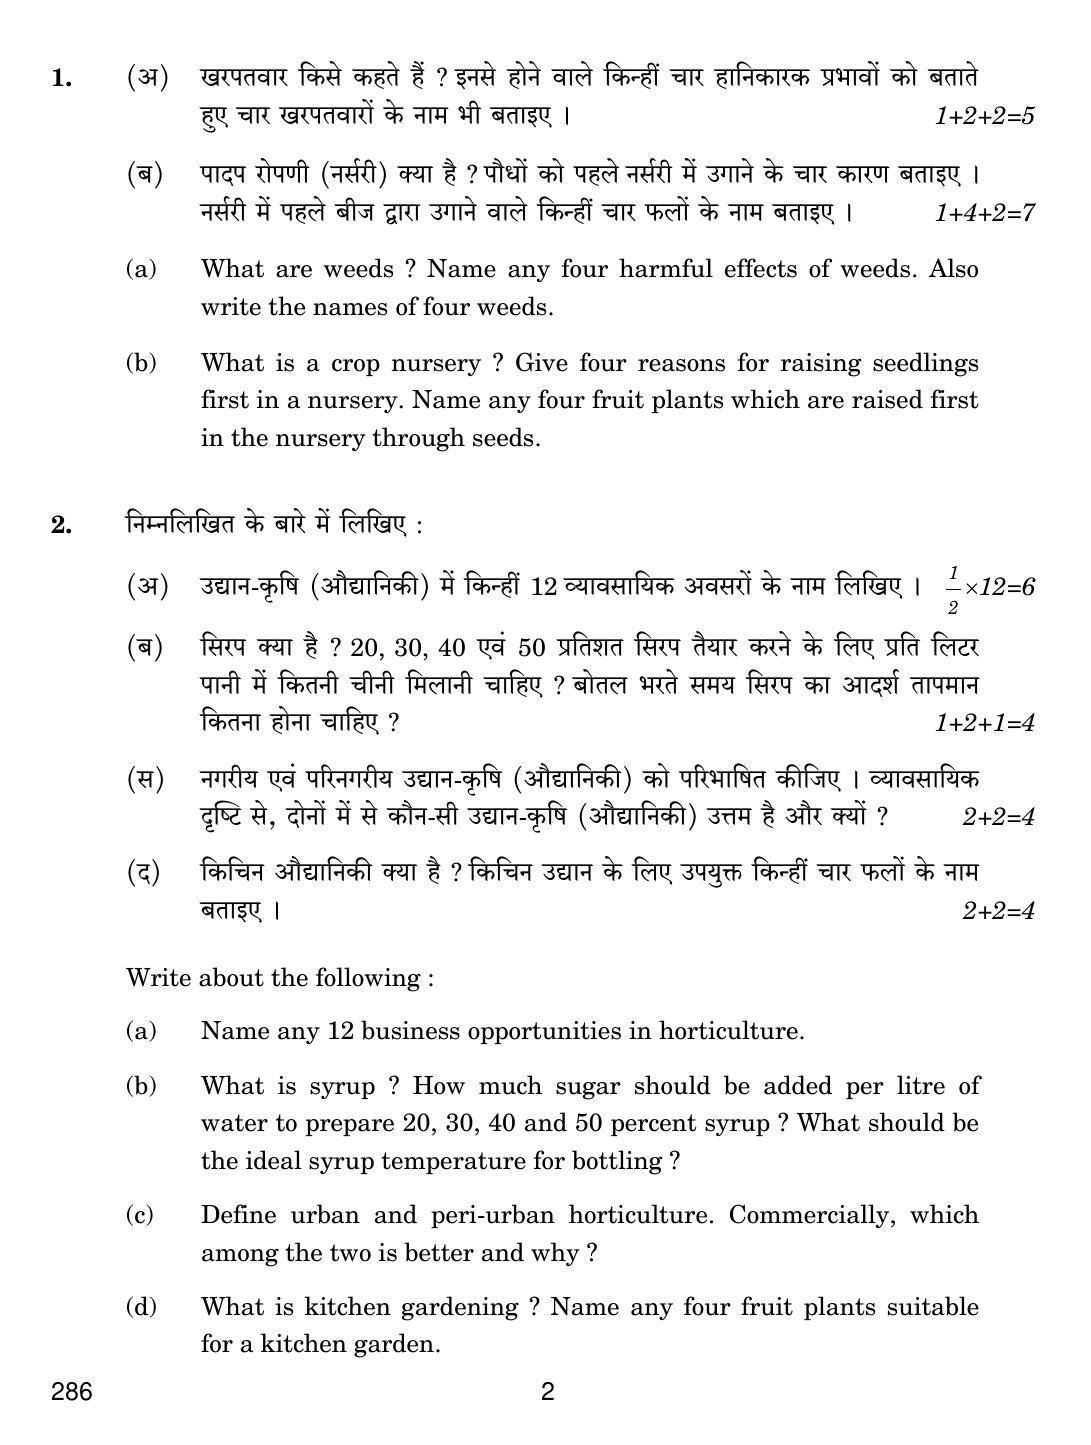 CBSE Class 12 286 BASIC HORTICULTURE 2018 Question Paper - Page 2